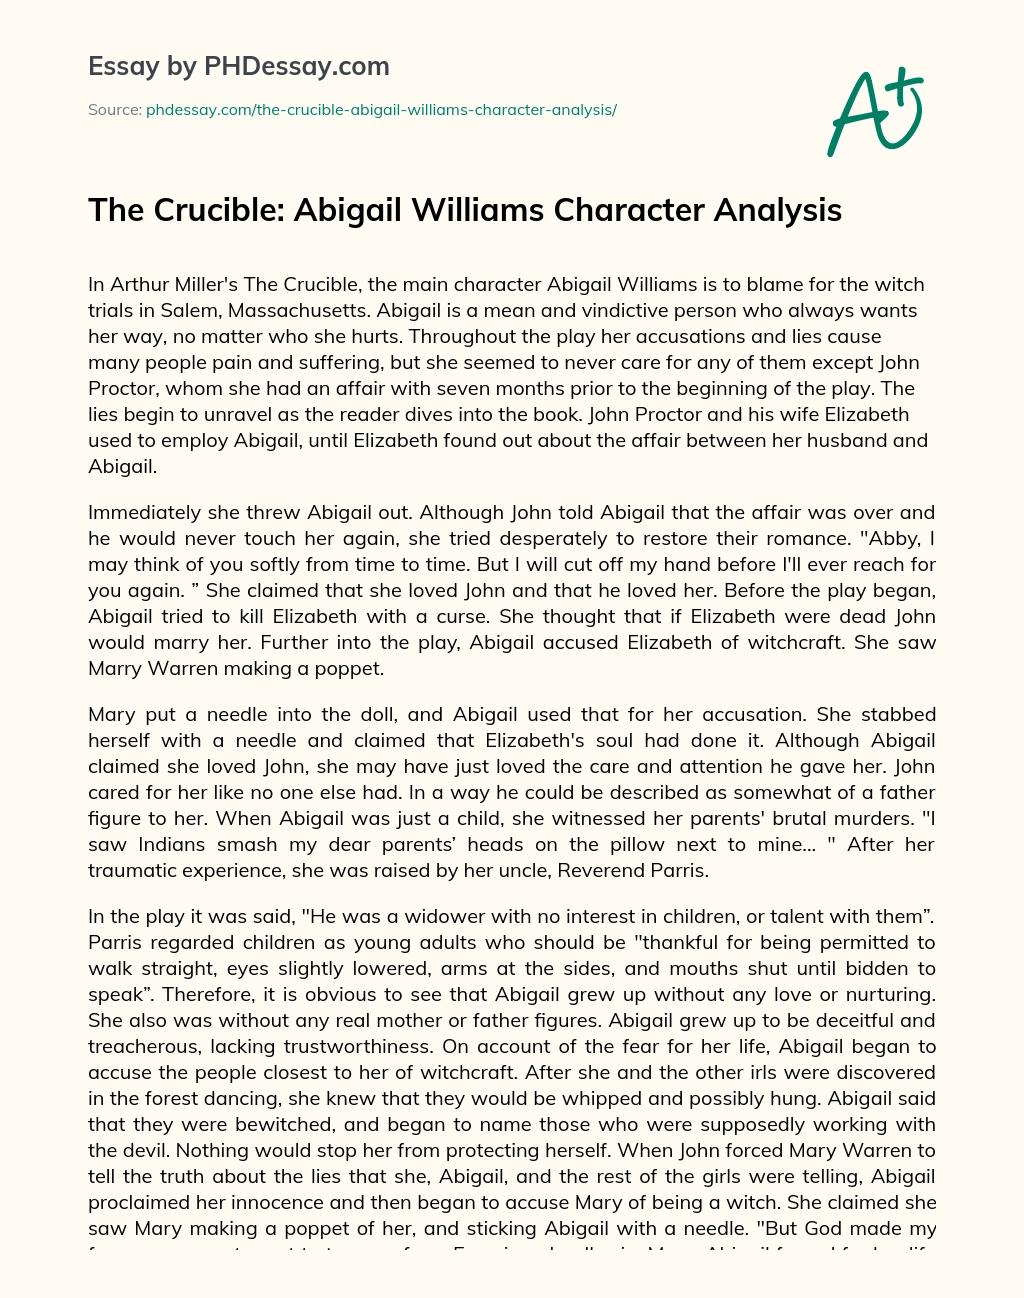 The Crucible: Abigail Williams Character Analysis essay